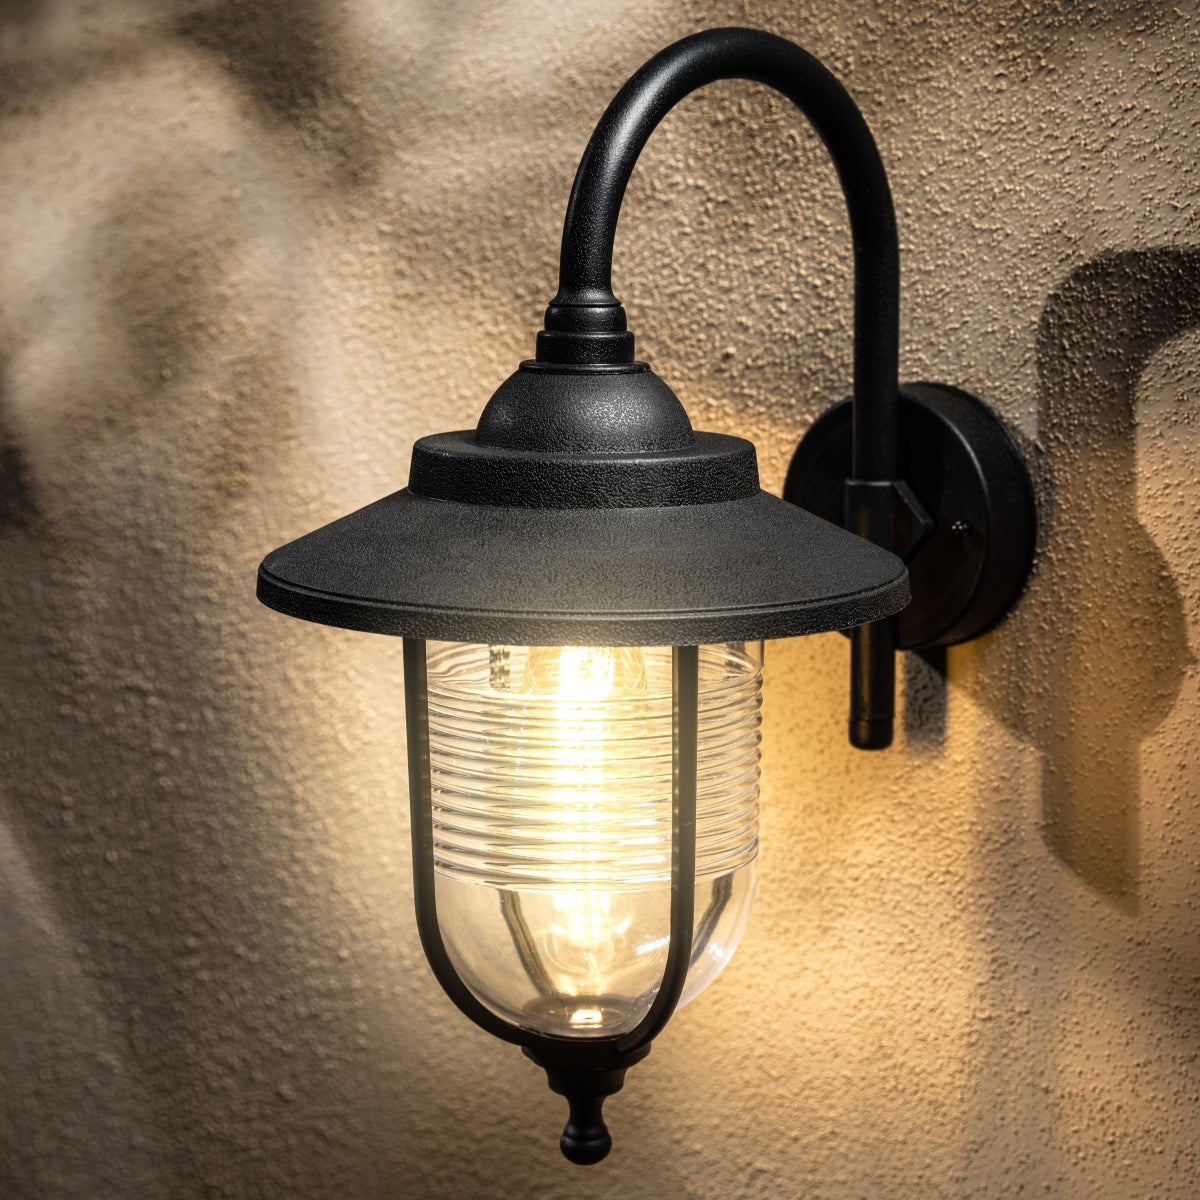 The Jemima black fisherman hooked outdoor wall lantern light is constructed of polycarbonate and features an attractive design inspired by traditional lighting styles. This lantern wall light is a great choice for illuminating doorways and porches, creating a warm and inviting look and a safe environment. With an IP44 safety rating, the Jemima garden wall light is suitable for mounting on outdoor walls.